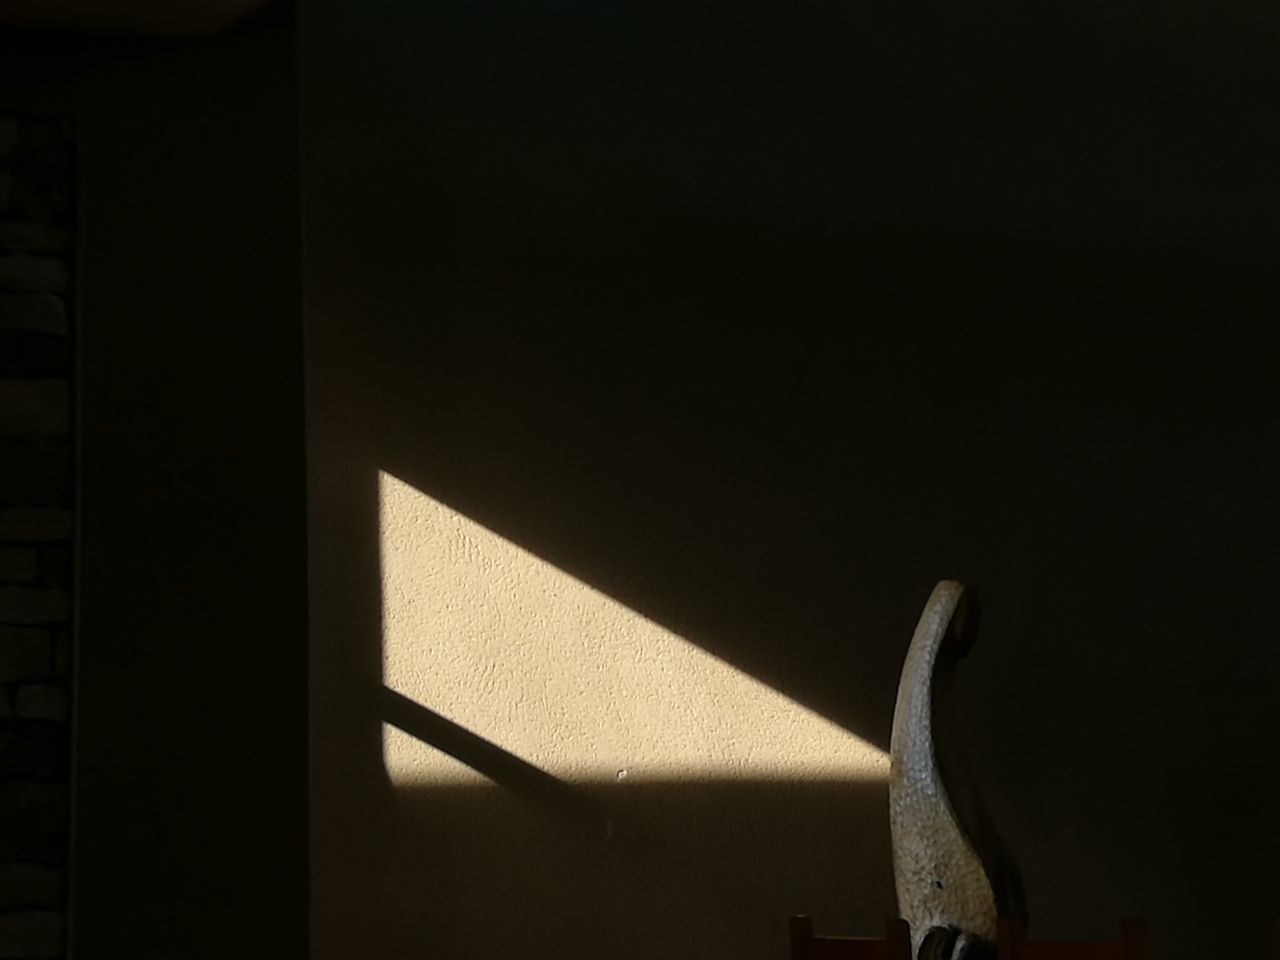 SUNLIGHT FALLING ON WALL AT HOME